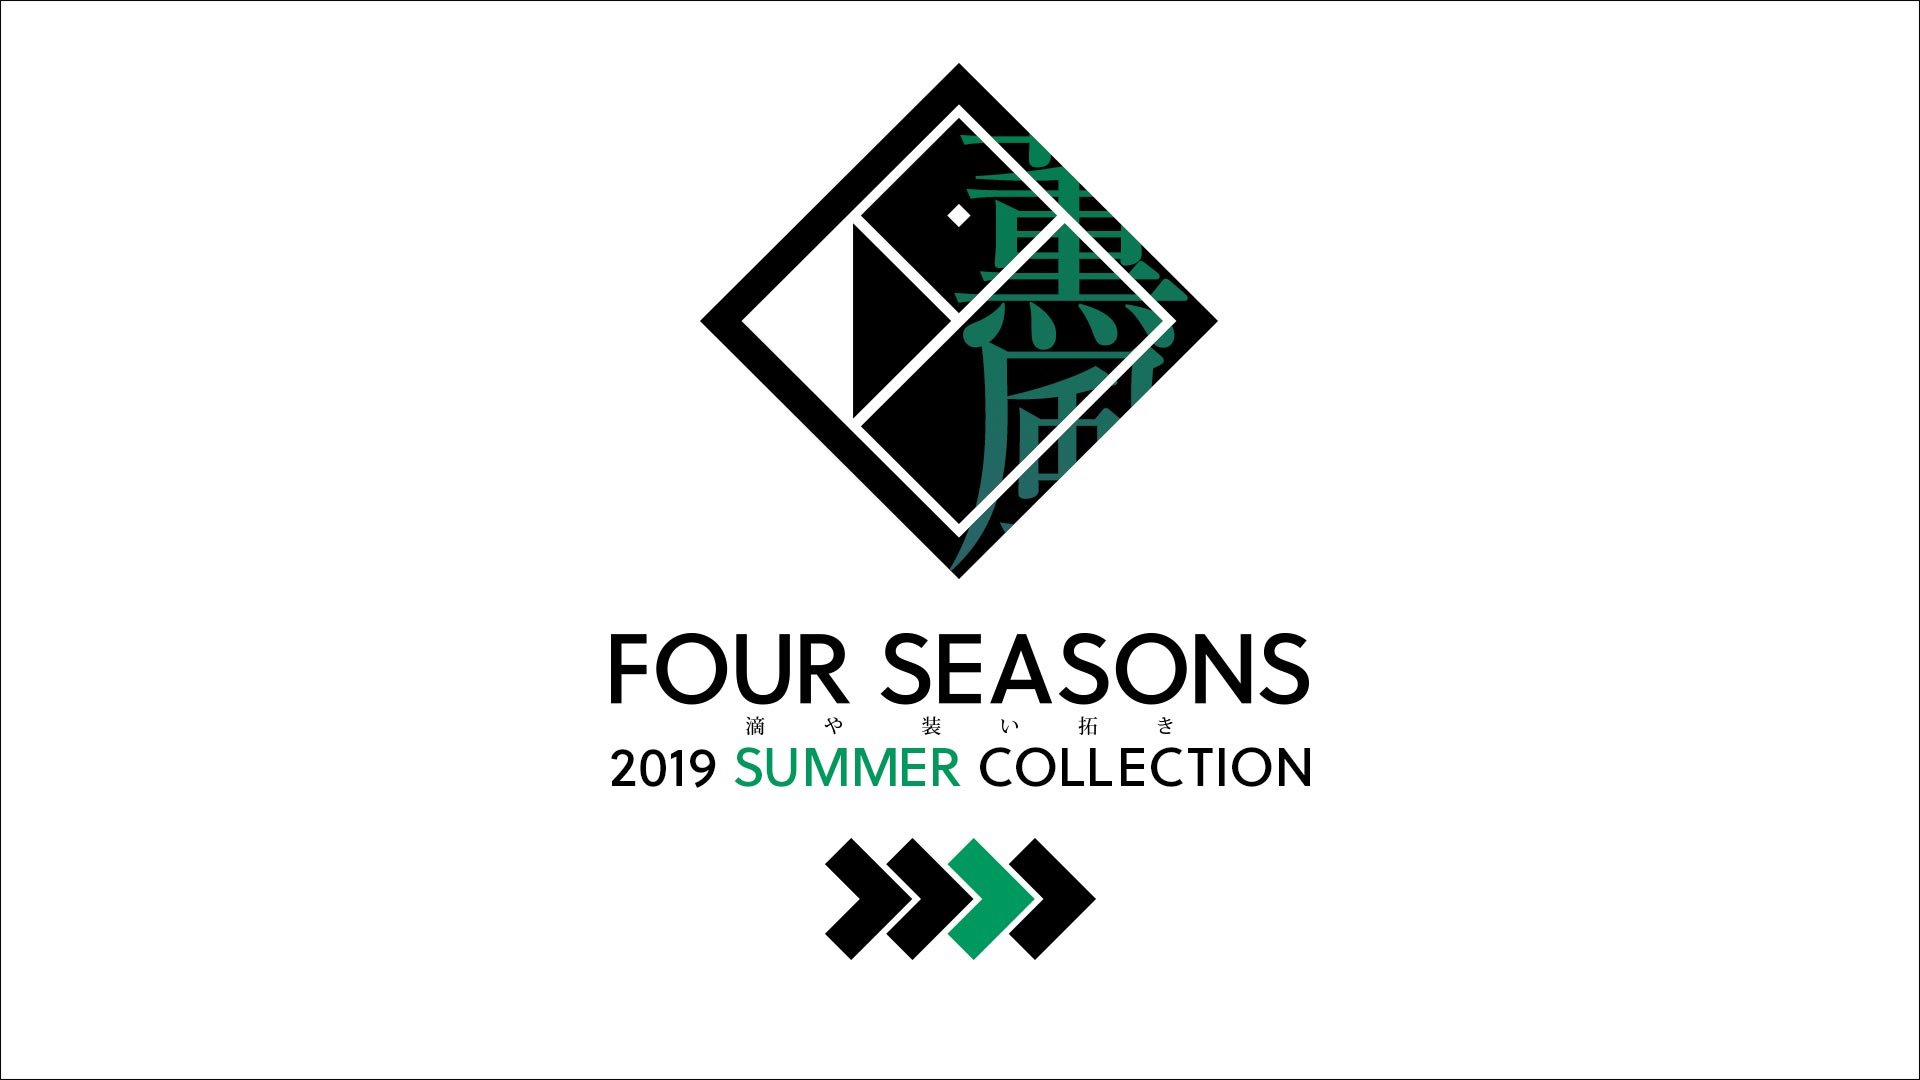 [PHOTO:FOUR SEASONS 2019 SUMMER COLLECTION]